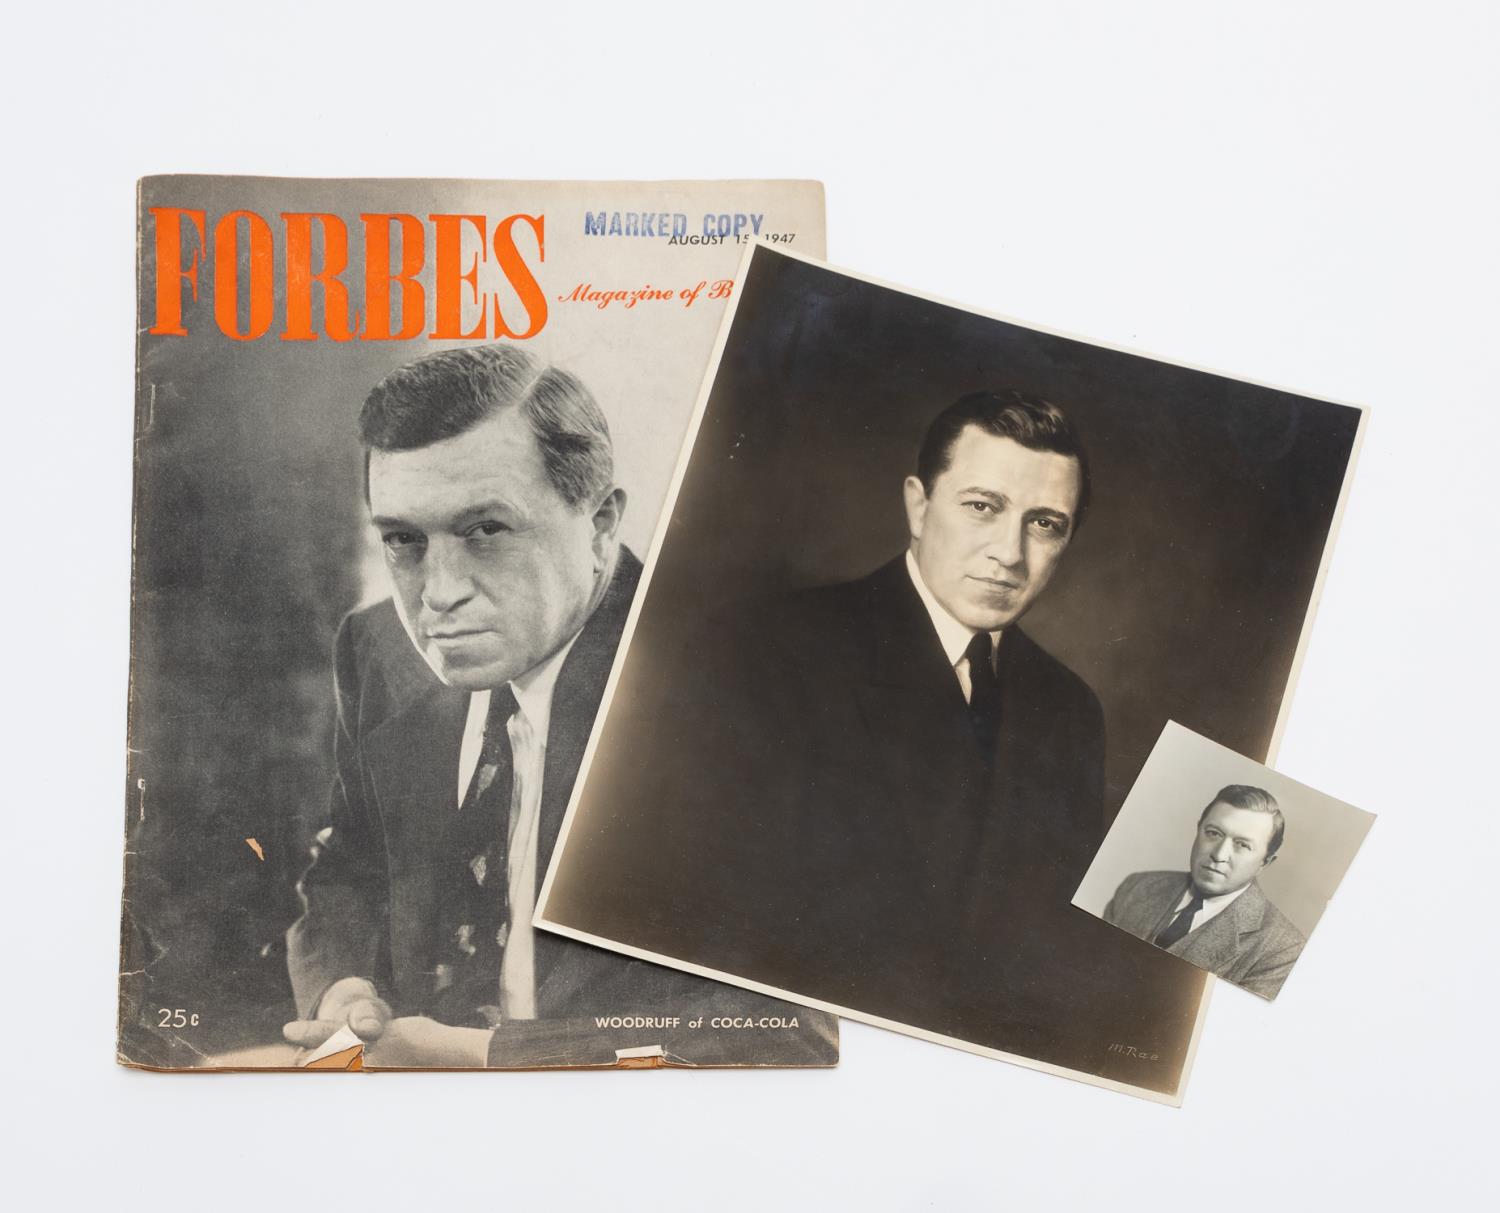 FORBES ROBERT WOODRUFF COVER AND 359c8f